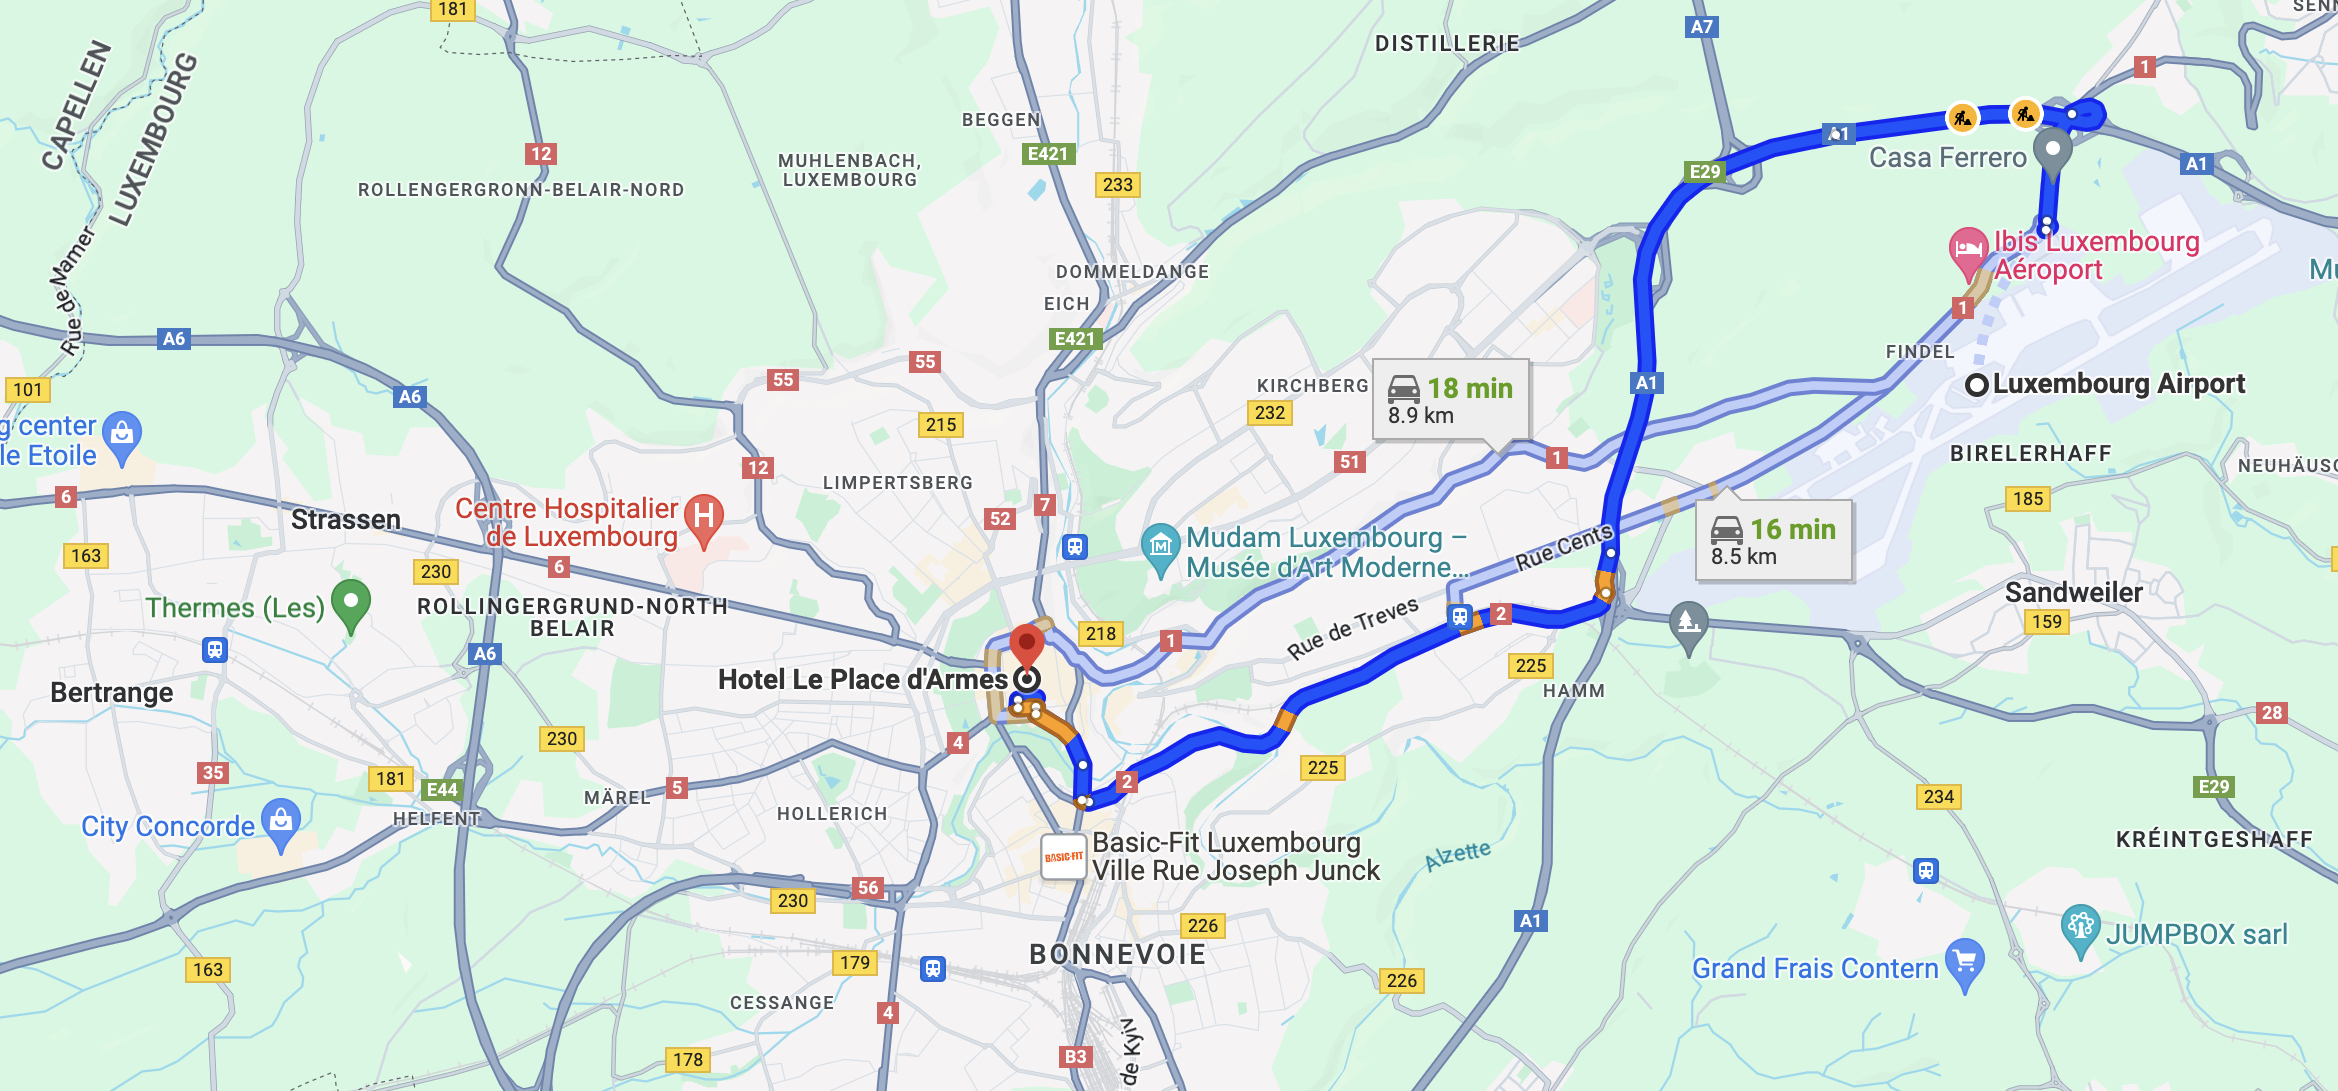 Luxembourg Map